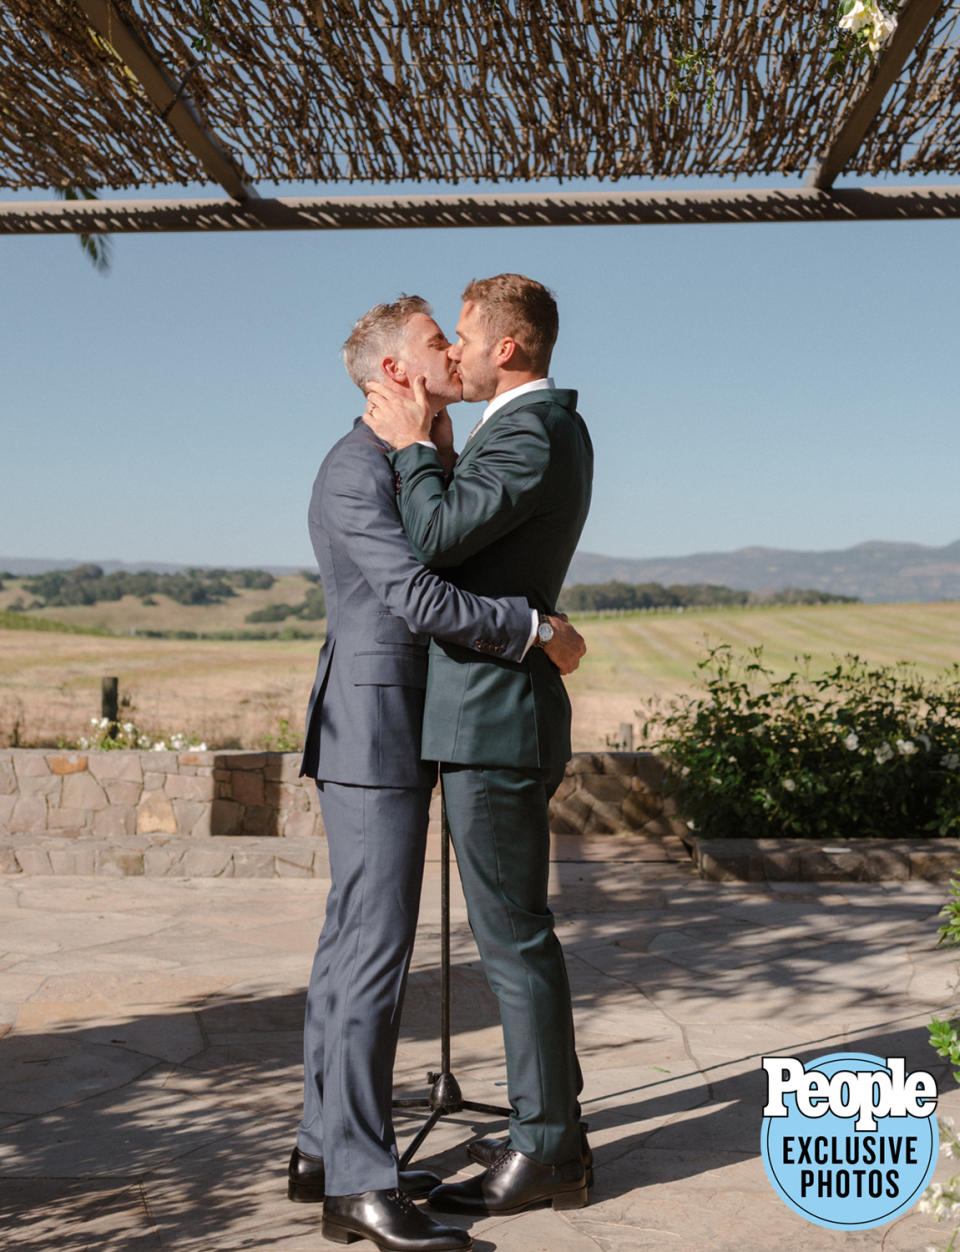 <p>The couple recited vows they wrote themselves, and instead of a wedding party, walked down the aisle together. </p> <p>"We're really making these moments authentic to who we are and how we want to celebrate, it's our vision for the day," Underwood said. "We're honoring that and checking in with each other ... this is our time to do what we want."</p>